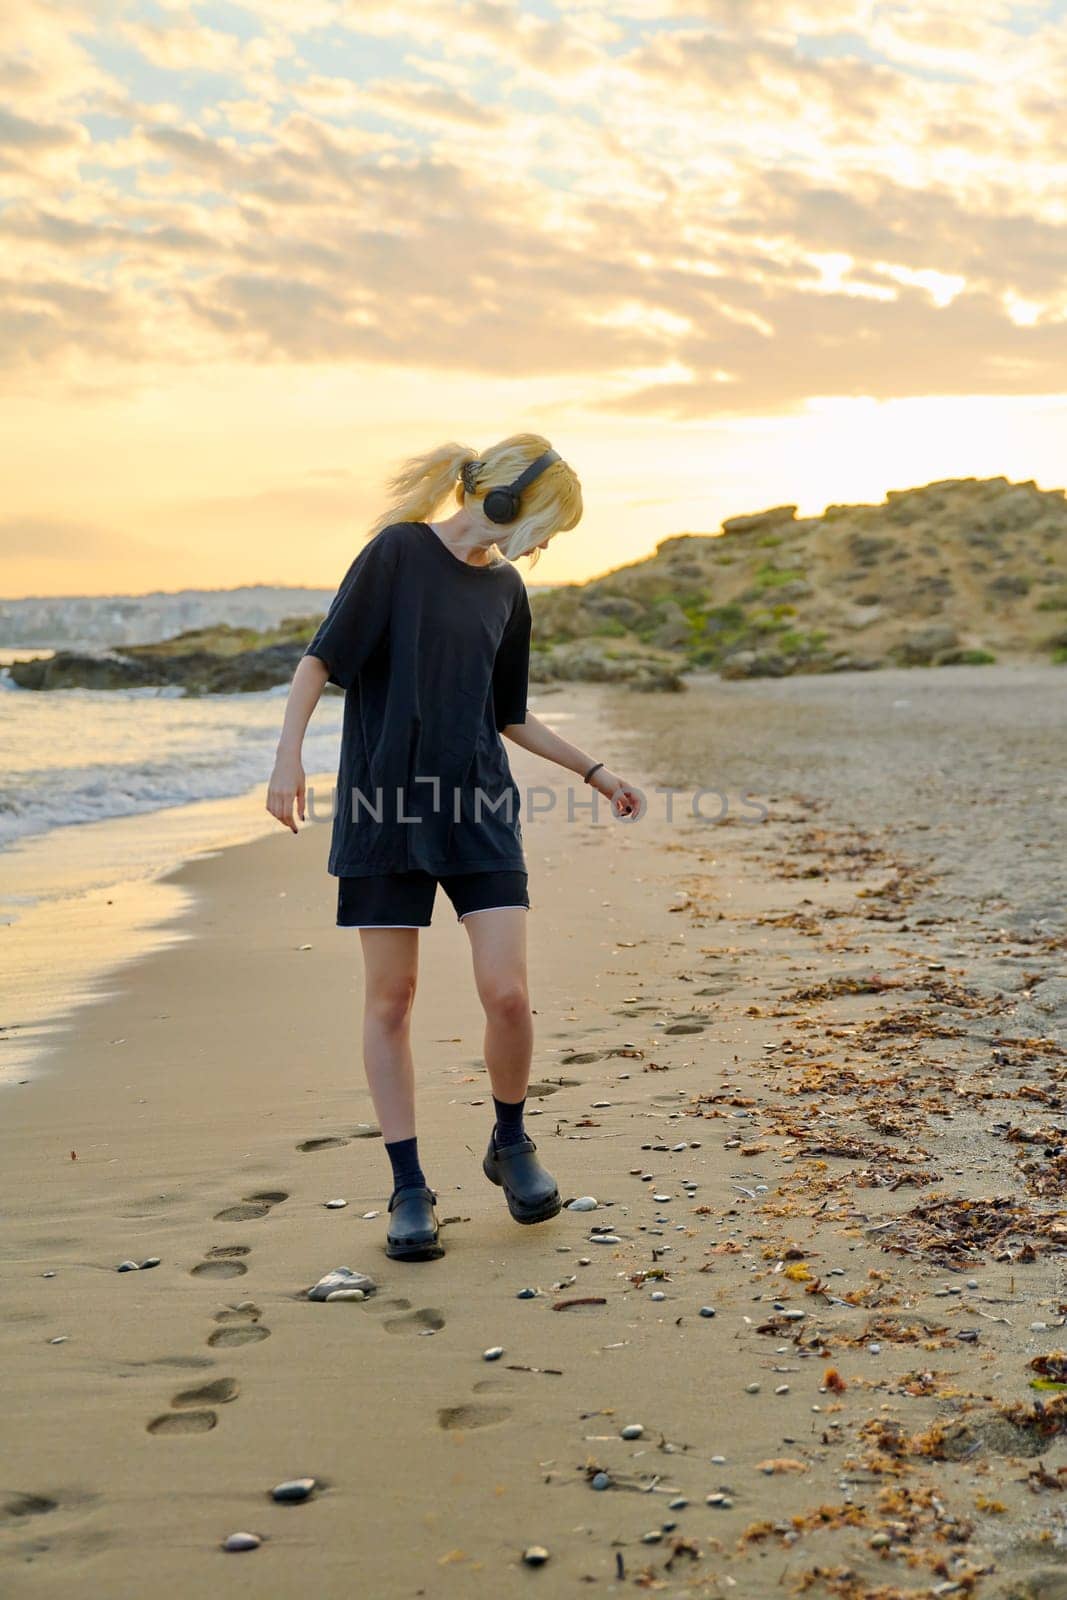 Young teenage female on beach in morning. Hipster teenager in headphones walking along seashore with picturesque colorful sea nature. Summer sunrise, freedom vacation beauty youth concept